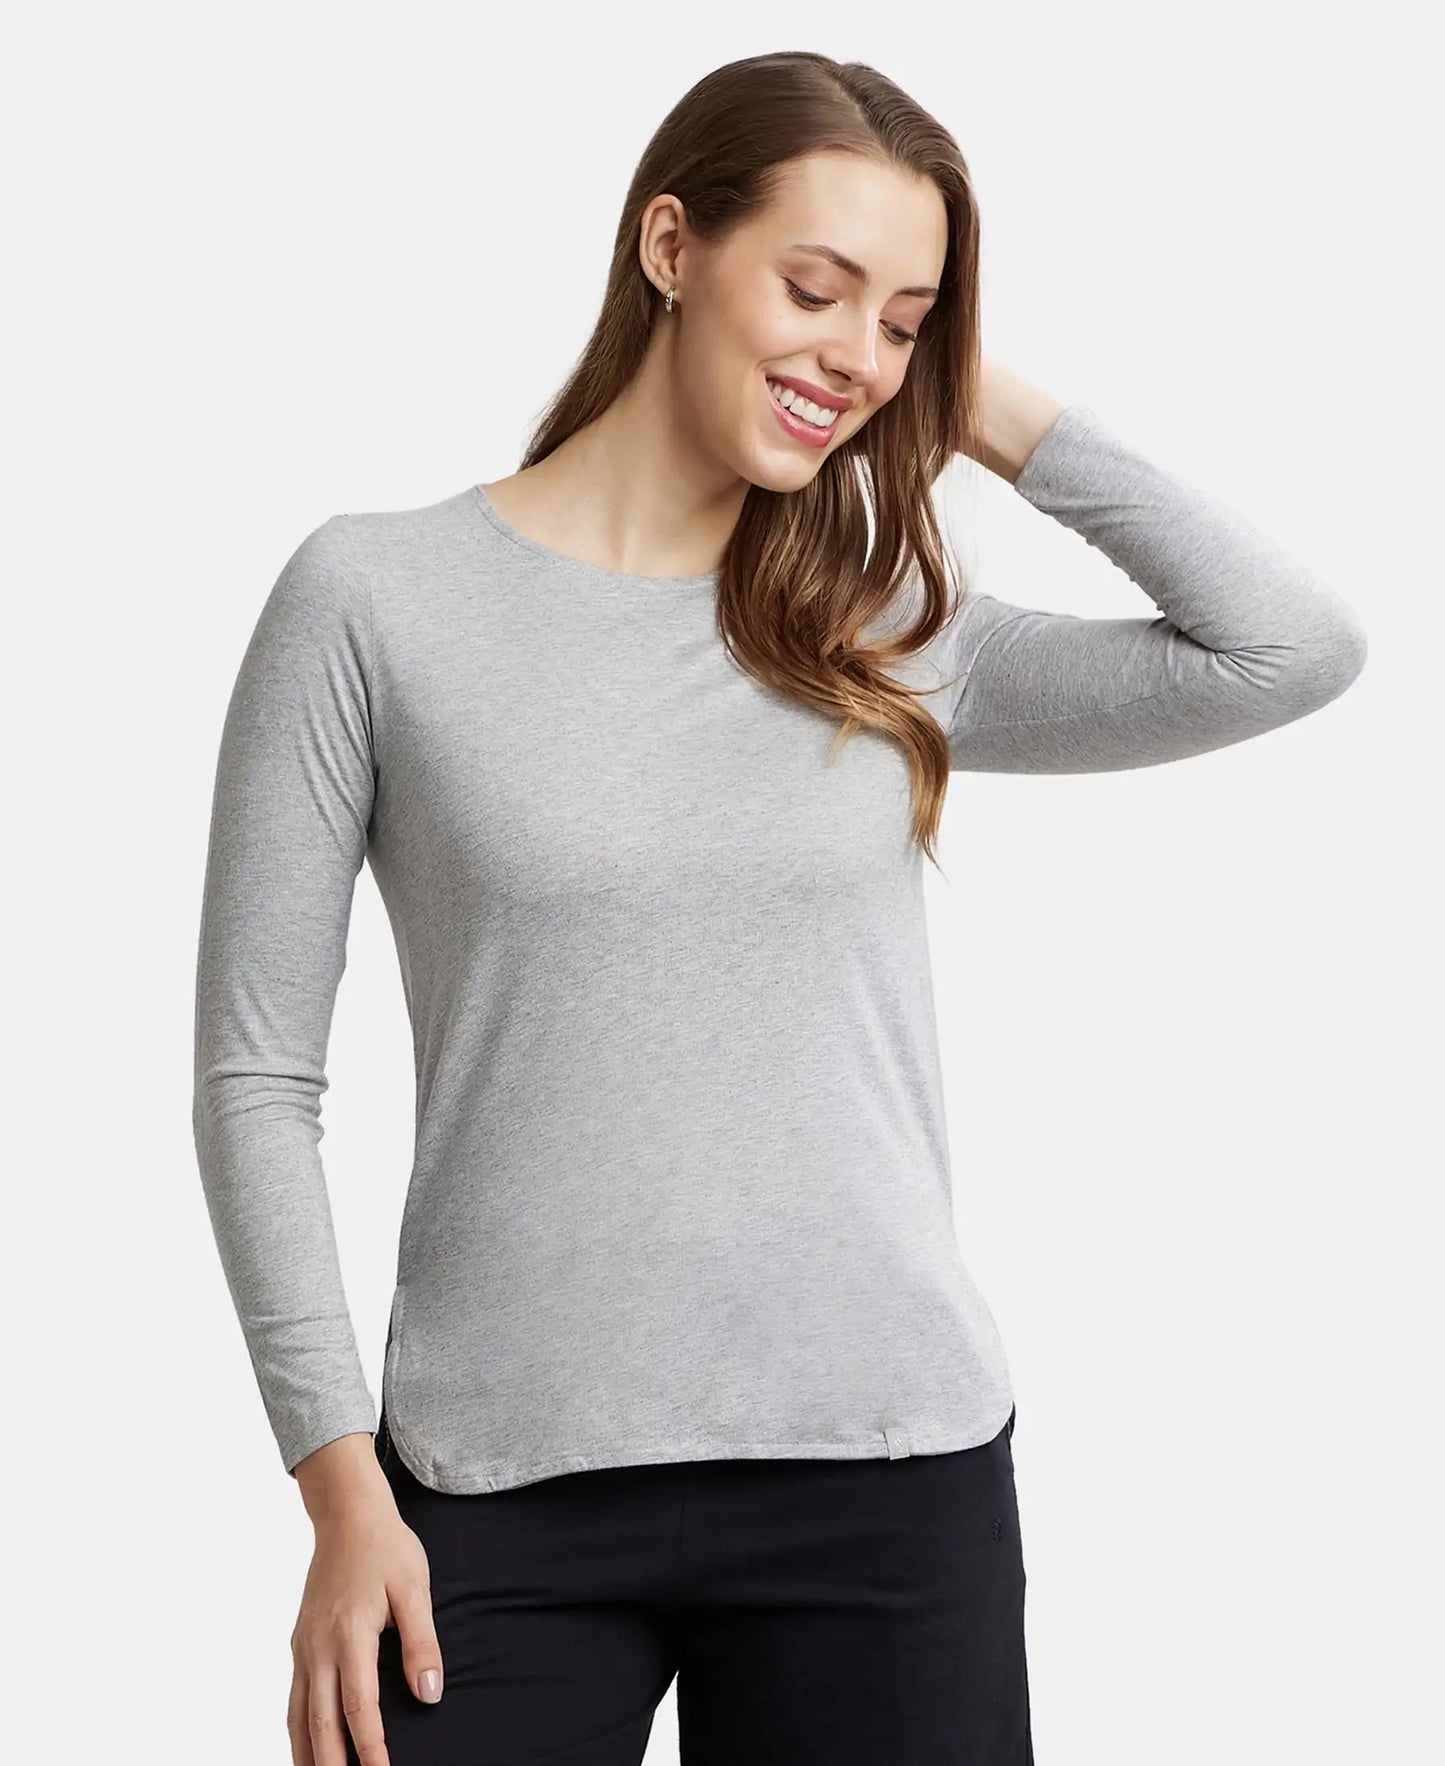 Micro Modal Cotton Relaxed Fit Solid Round Neck Full Sleeve T-Shirt with Curved Hem Styling - Light Grey Melange-5